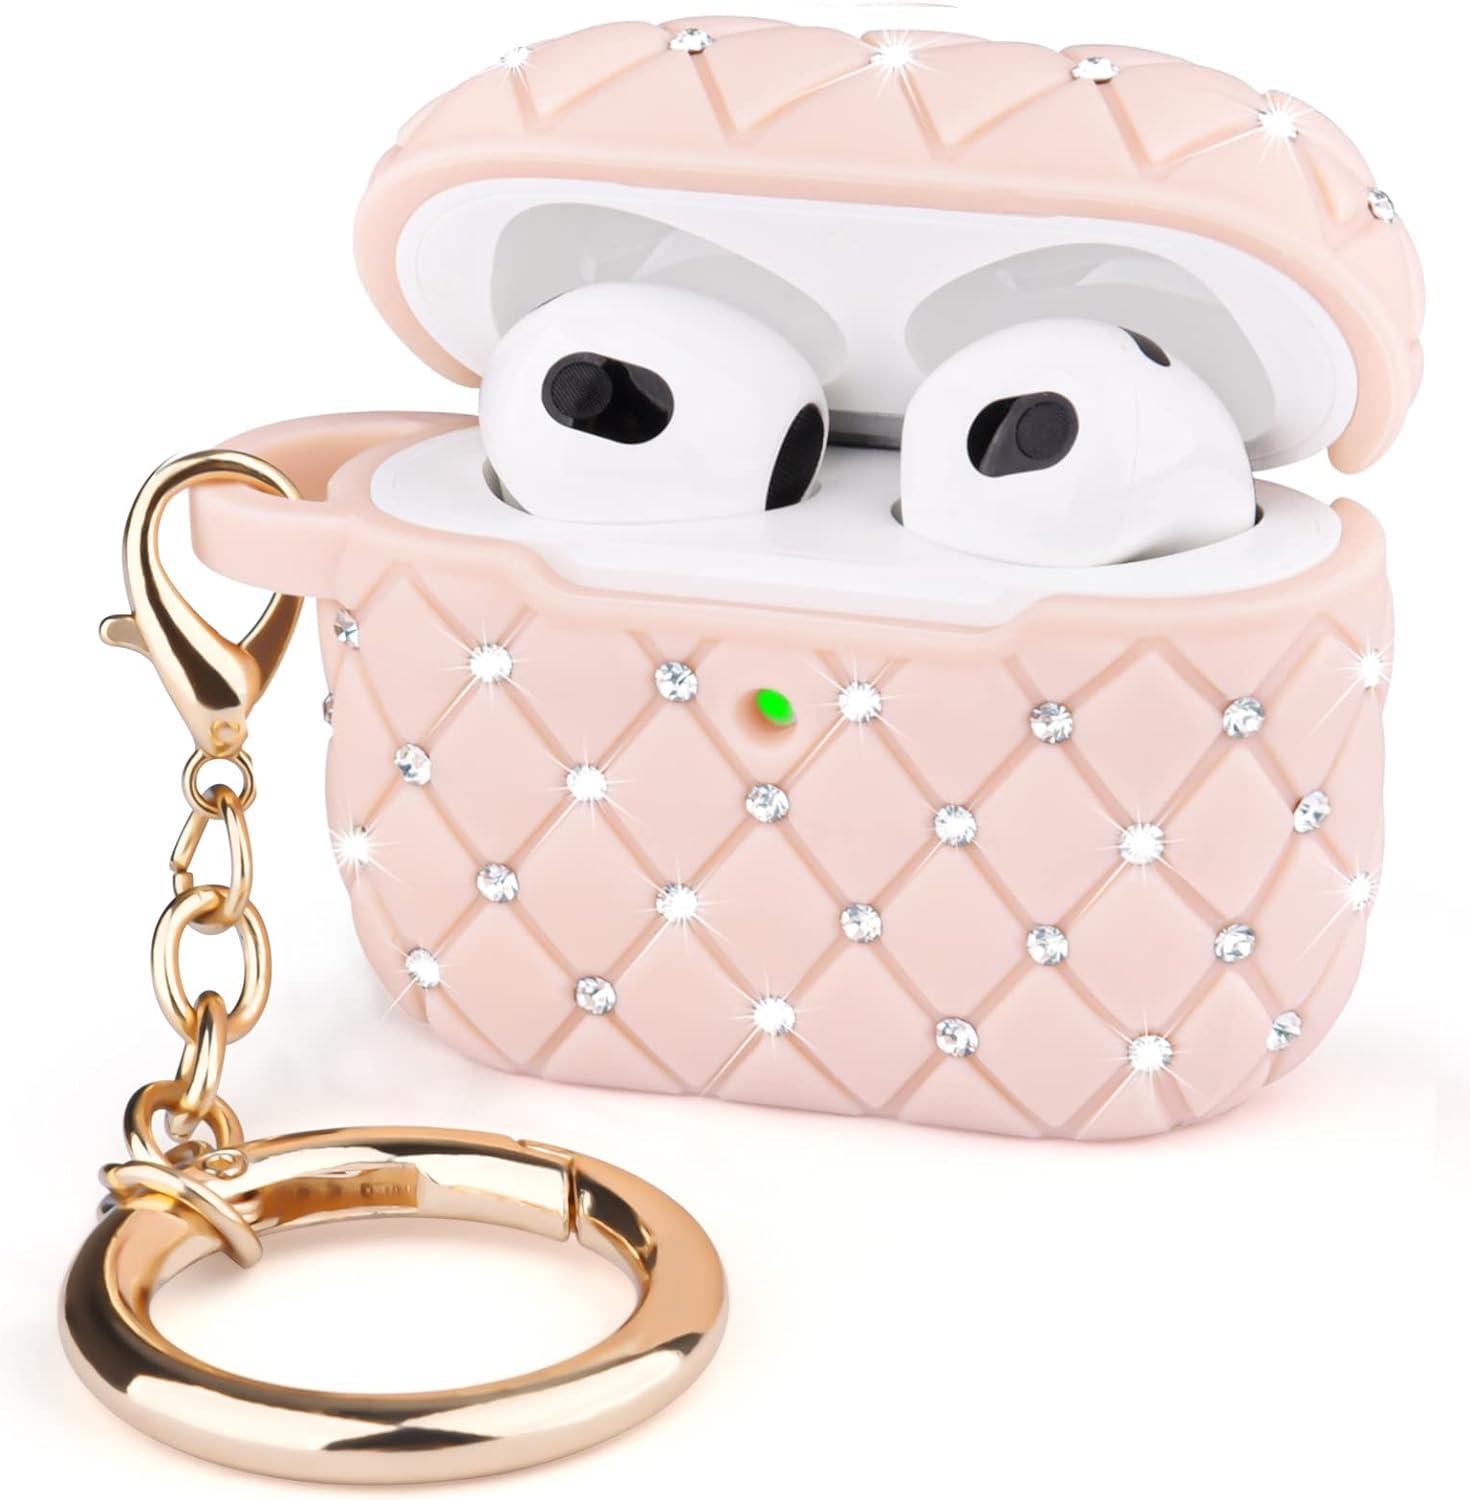 FR Fashion Co. Bling Crystal AirPods Pro Case Cover - FR Fashion Co. 